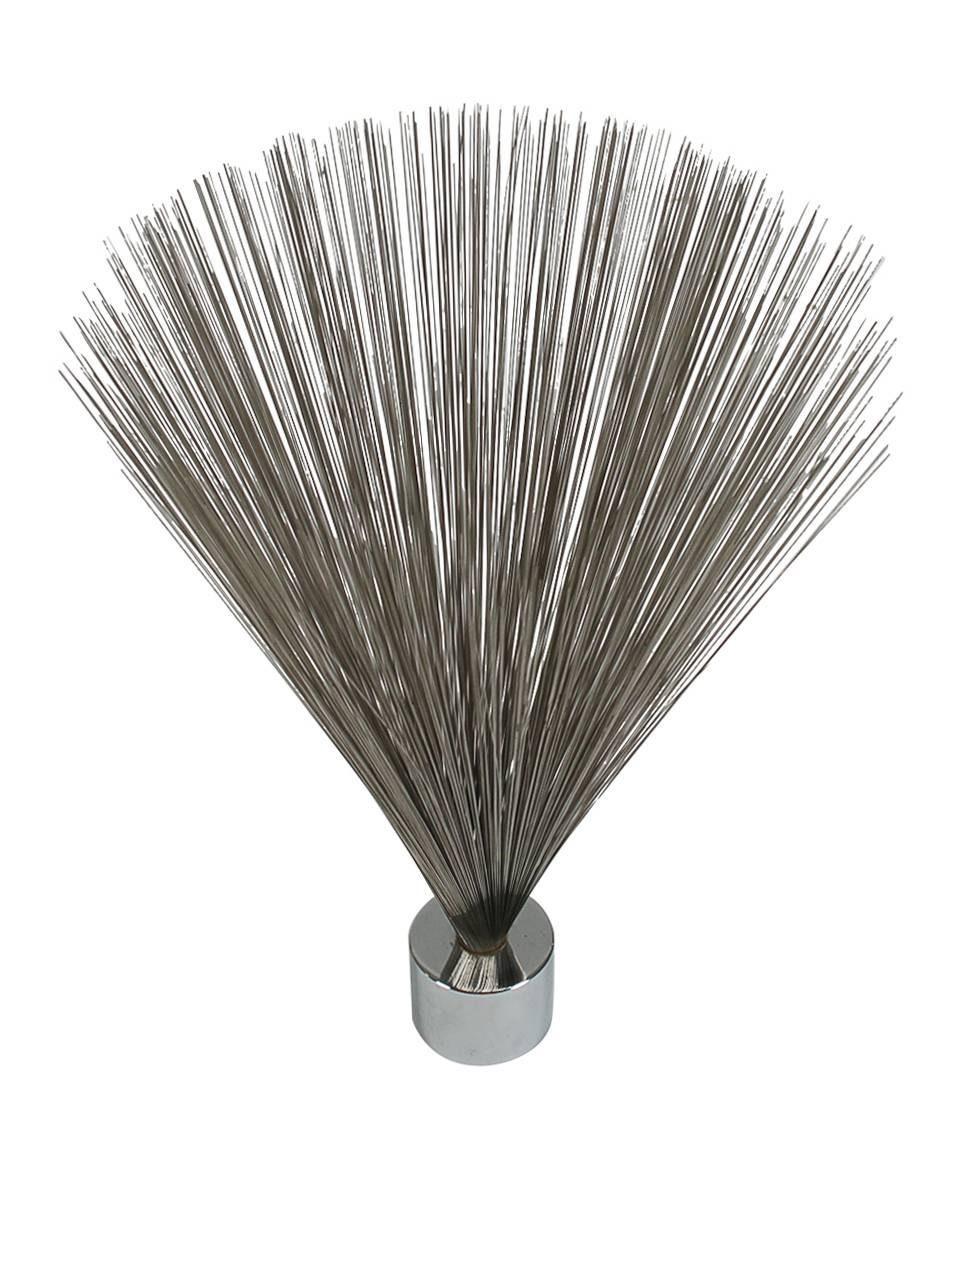 A very cool vintage wire spray sculpture designed and manufactured by Dave Grossman in the 1970s. It features a heavy chrome cylinder base with 100s of thin wires splayed out. 

In the style of: Harry Bertoia or Curtis Jere